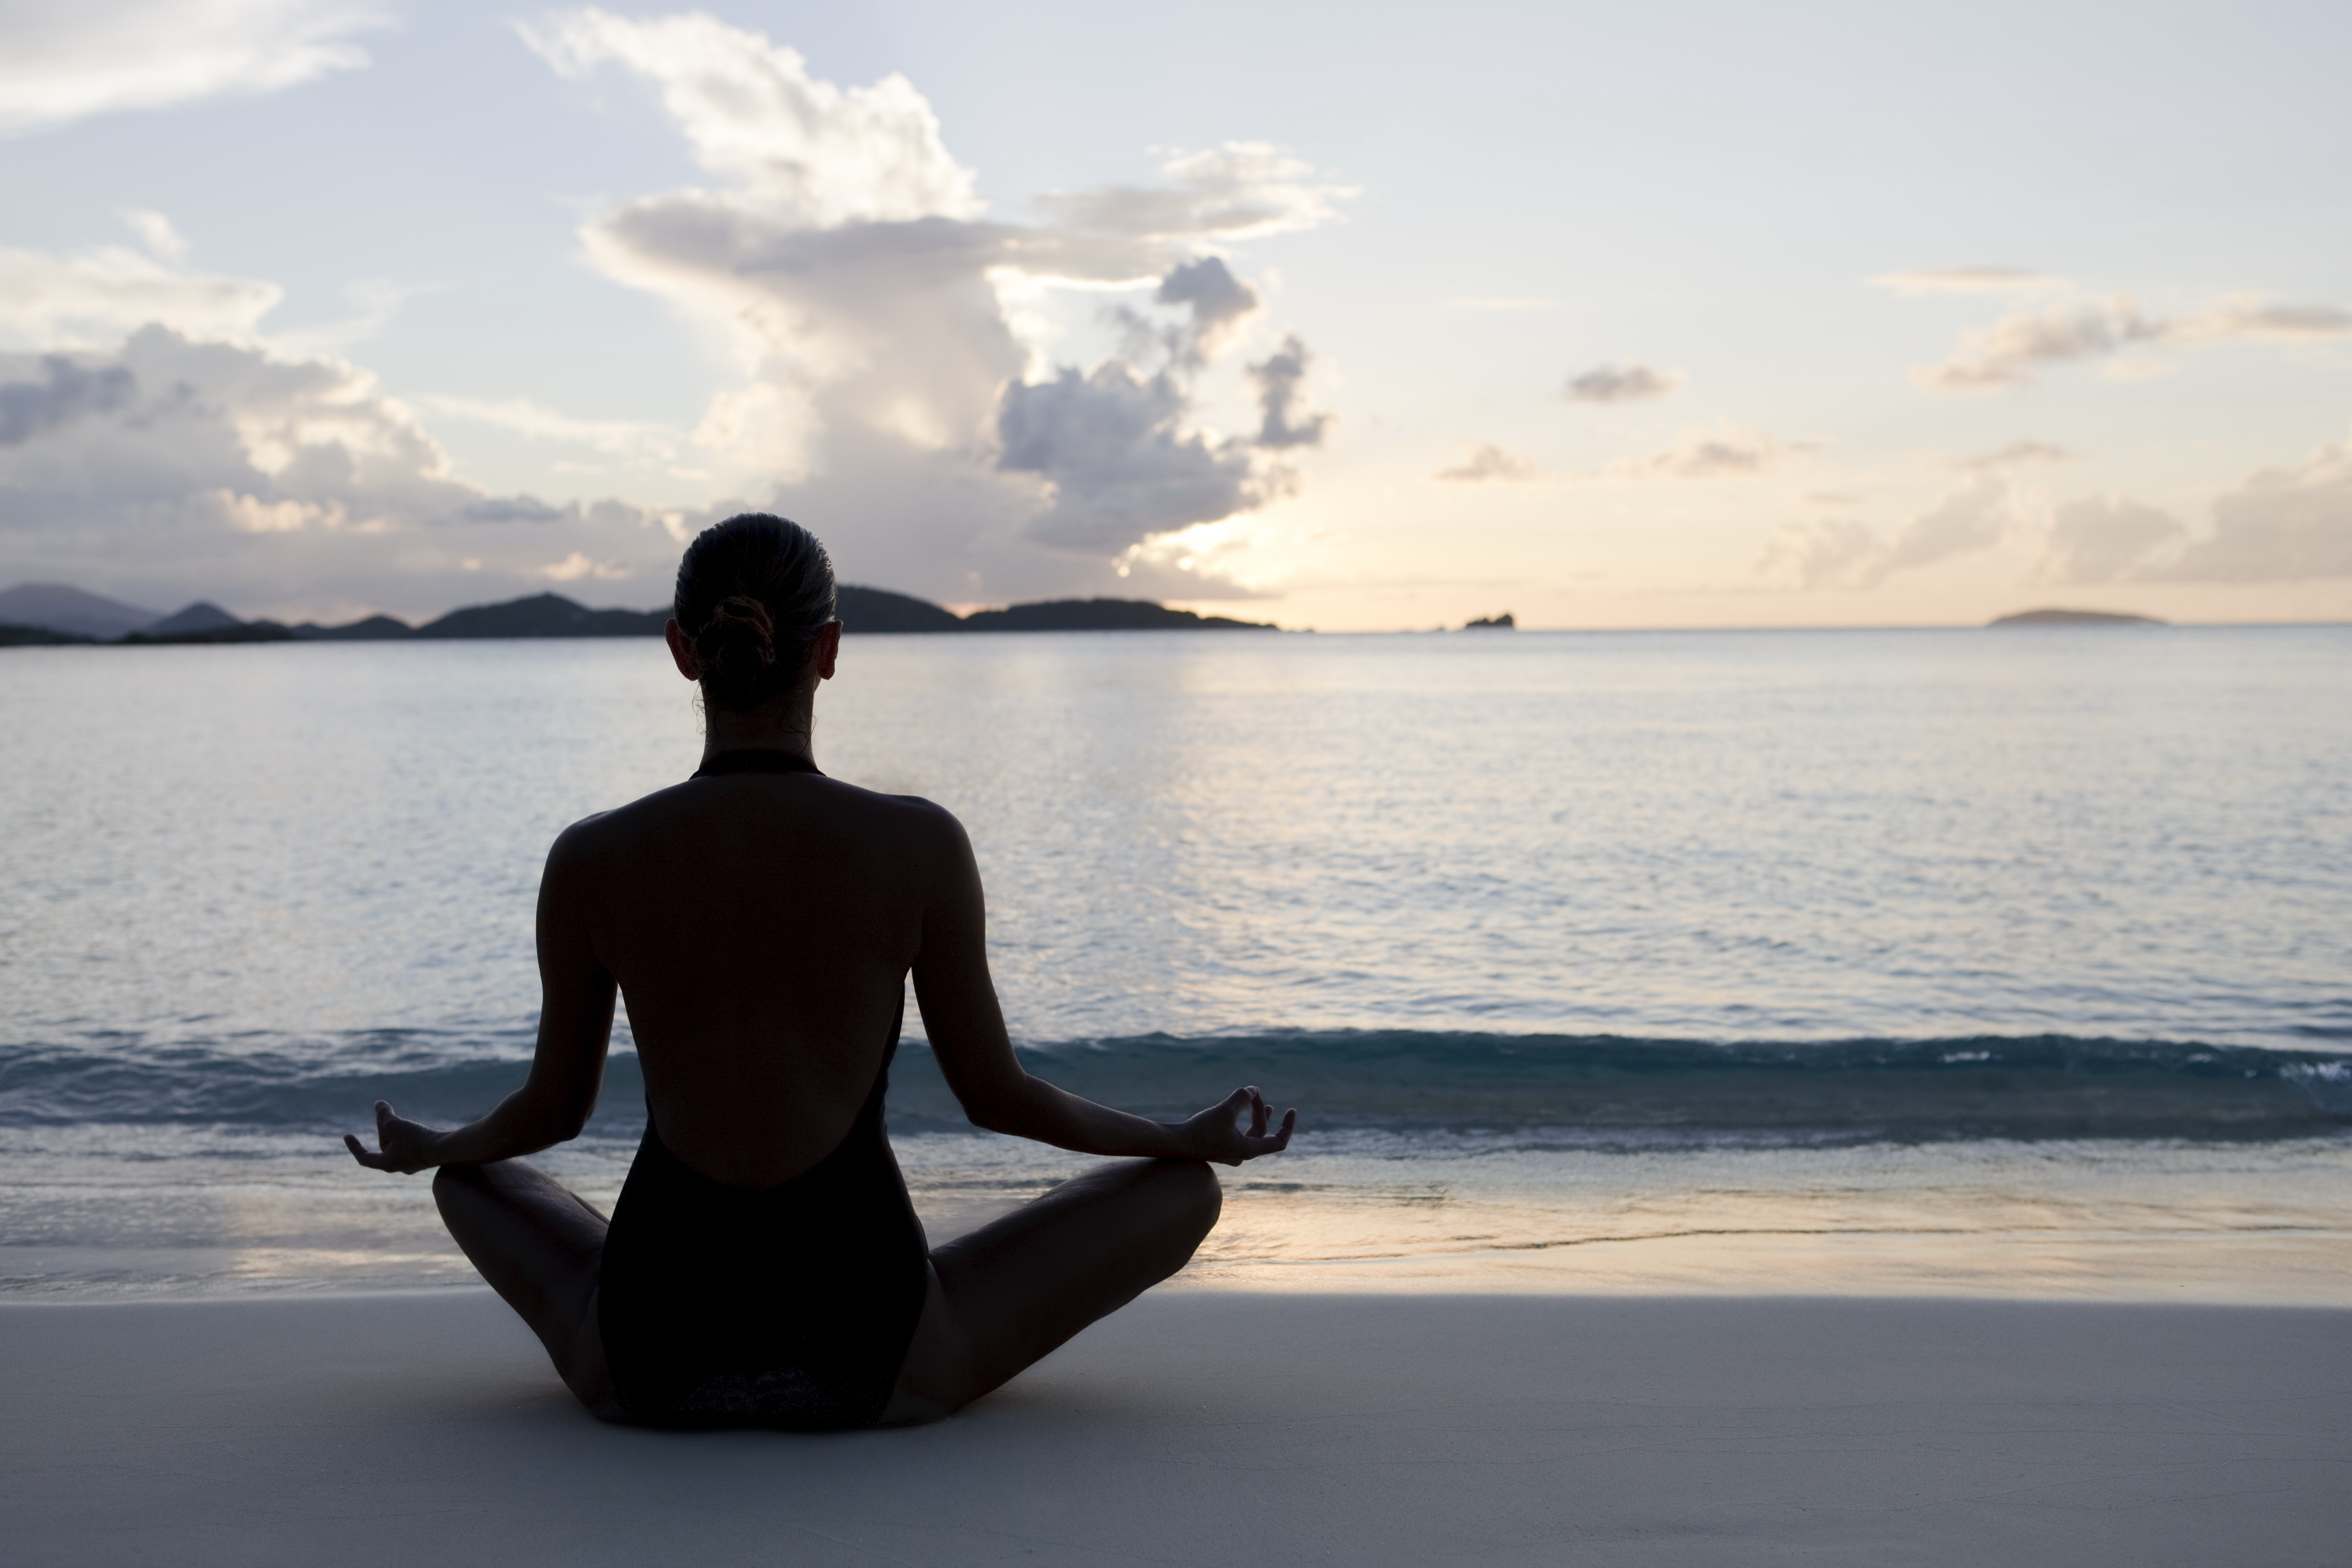 silhouette shot of woman practicing yoga at the Caribbean beach during sunset or sunrise